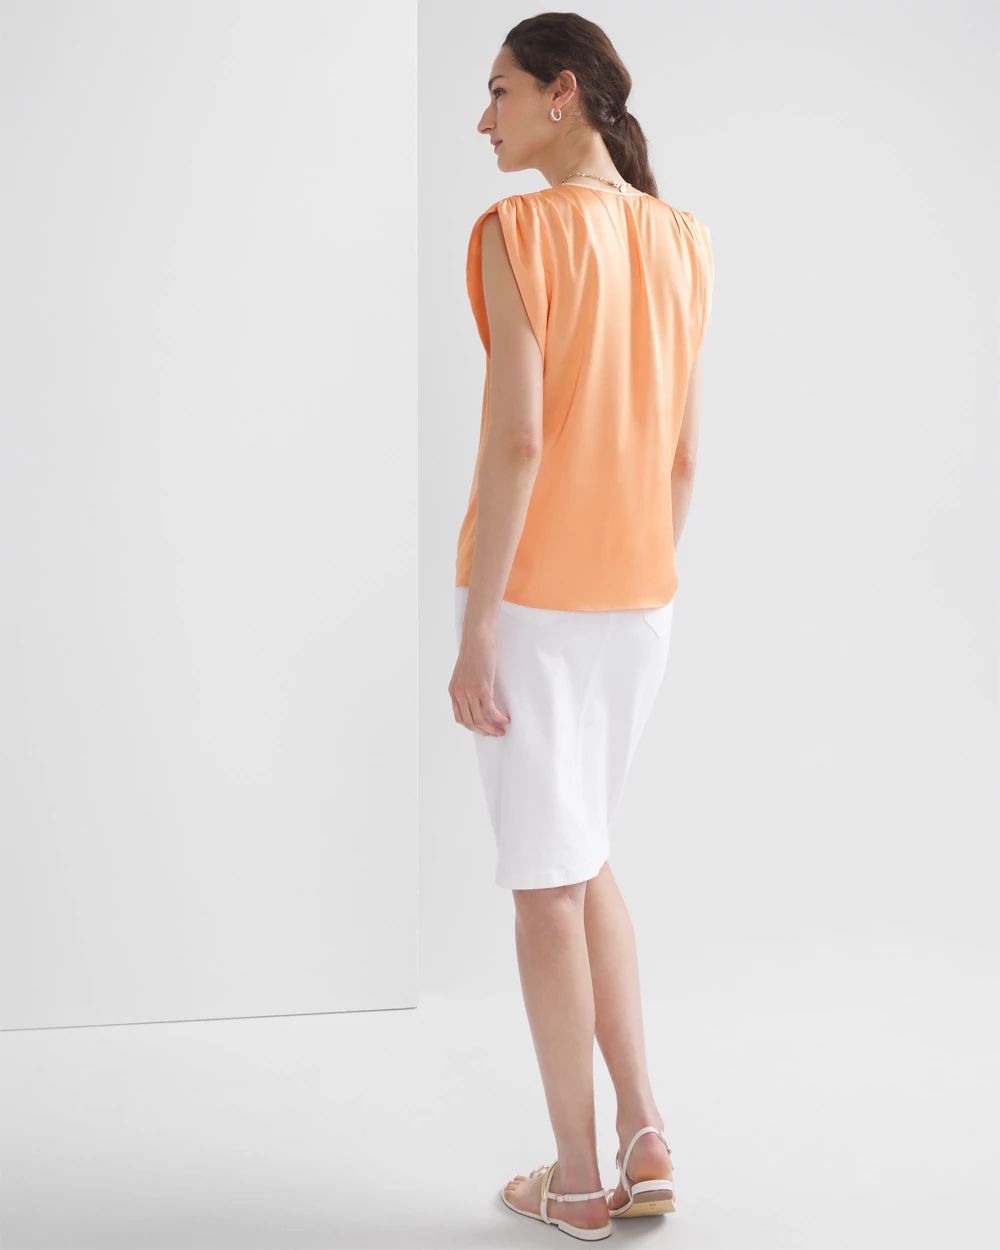 Petite Ruched Shoulder Shell Top click to view larger image.